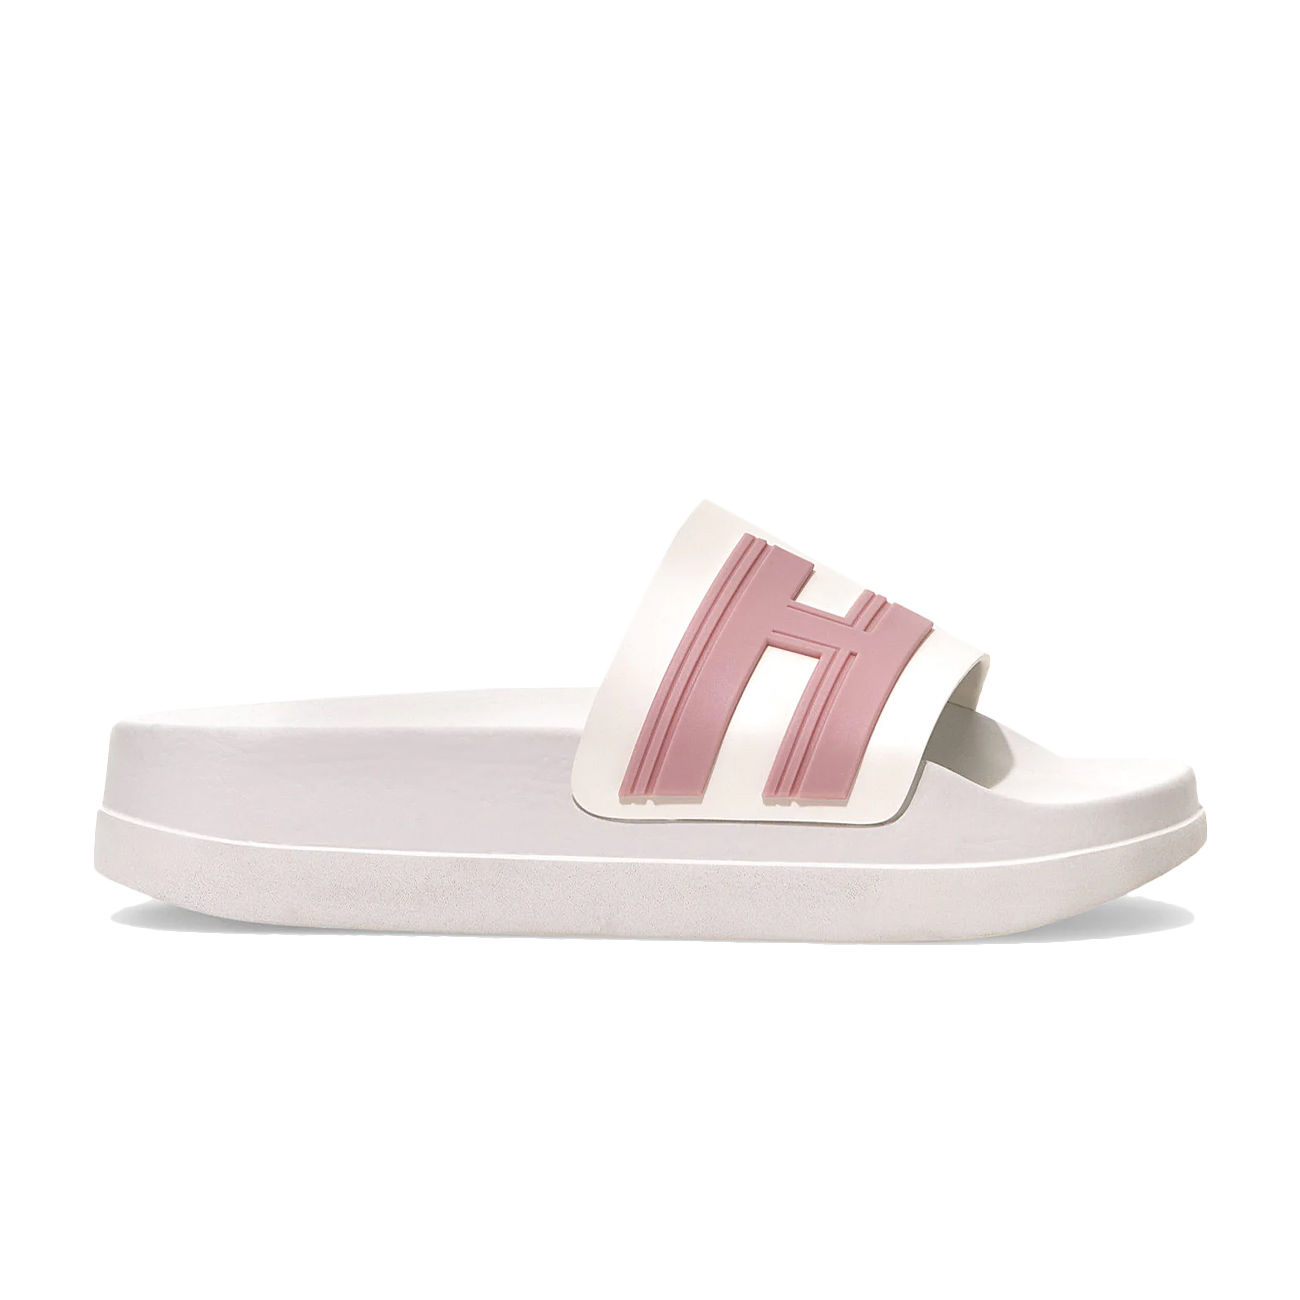 decaan trechter complexiteit HOGAN 3R RECYCLED RUBBER SLIPPERS Woman White Pink | Mascheroni Store